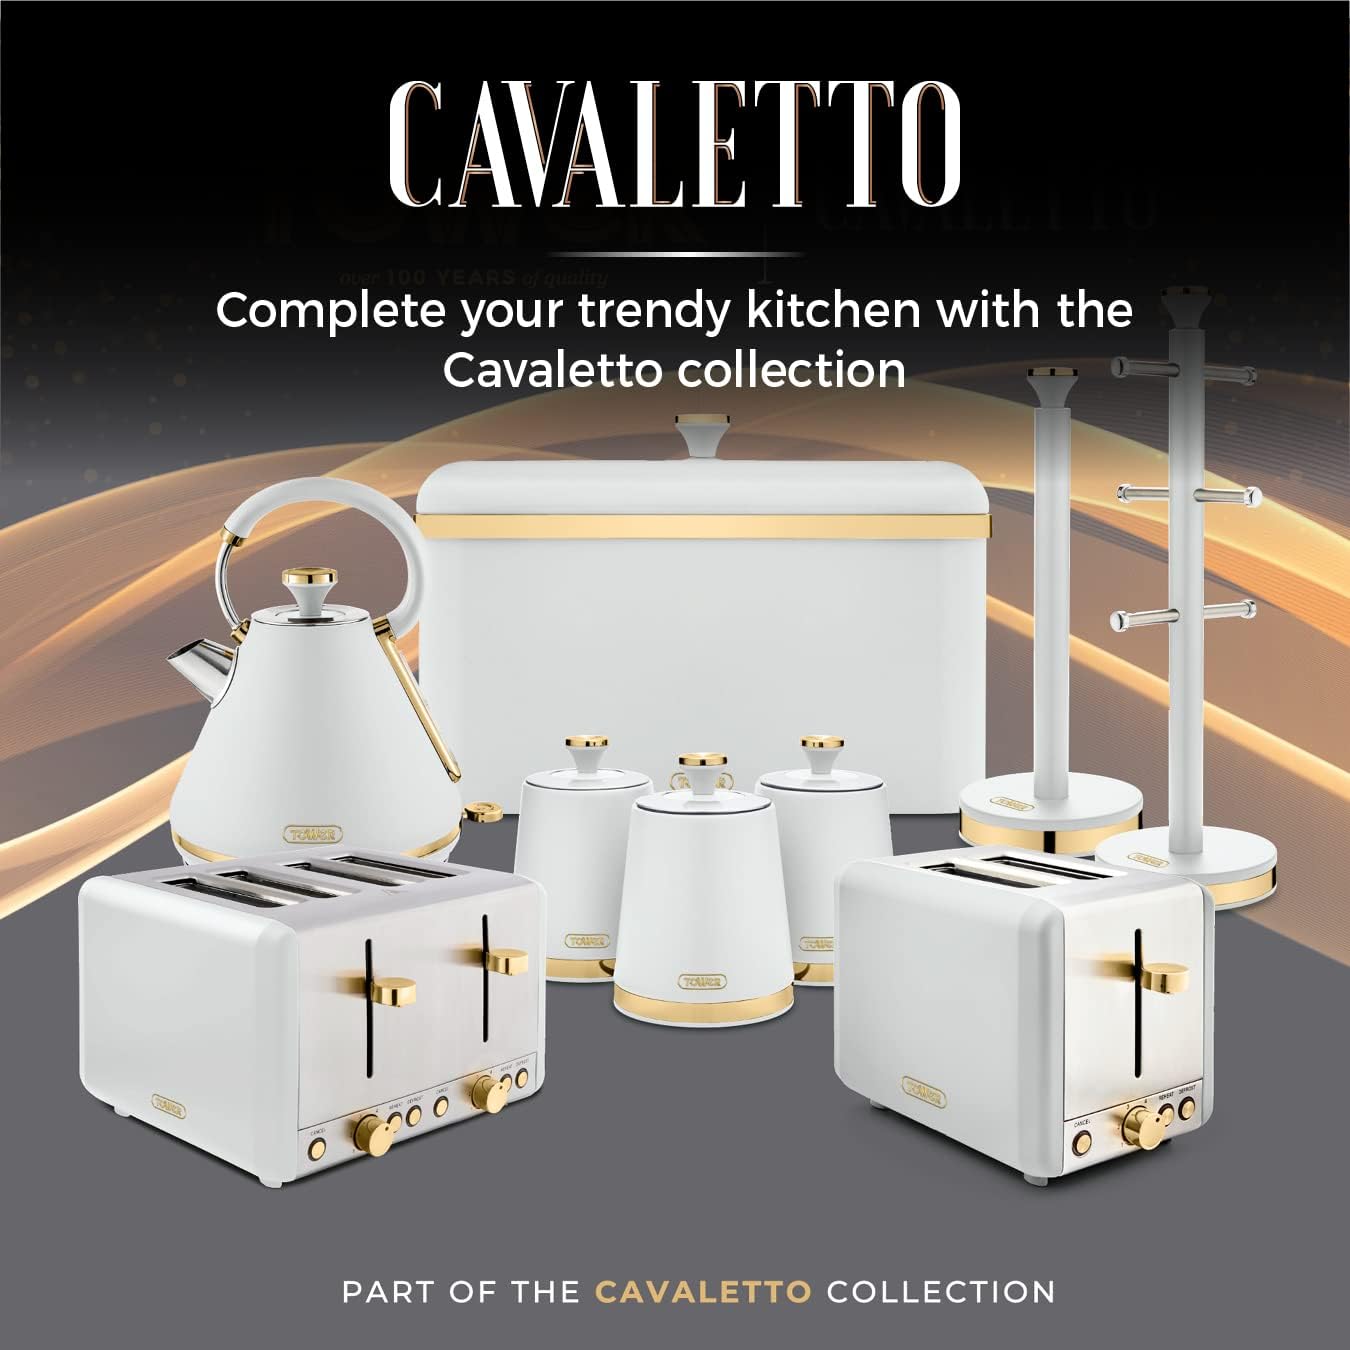 Tower T20036PNK Cavaletto 2-Slice Toaster with Defrost/Reheat, Stainless Steel, 850 W, Marshmallow Pink and Rose Gold